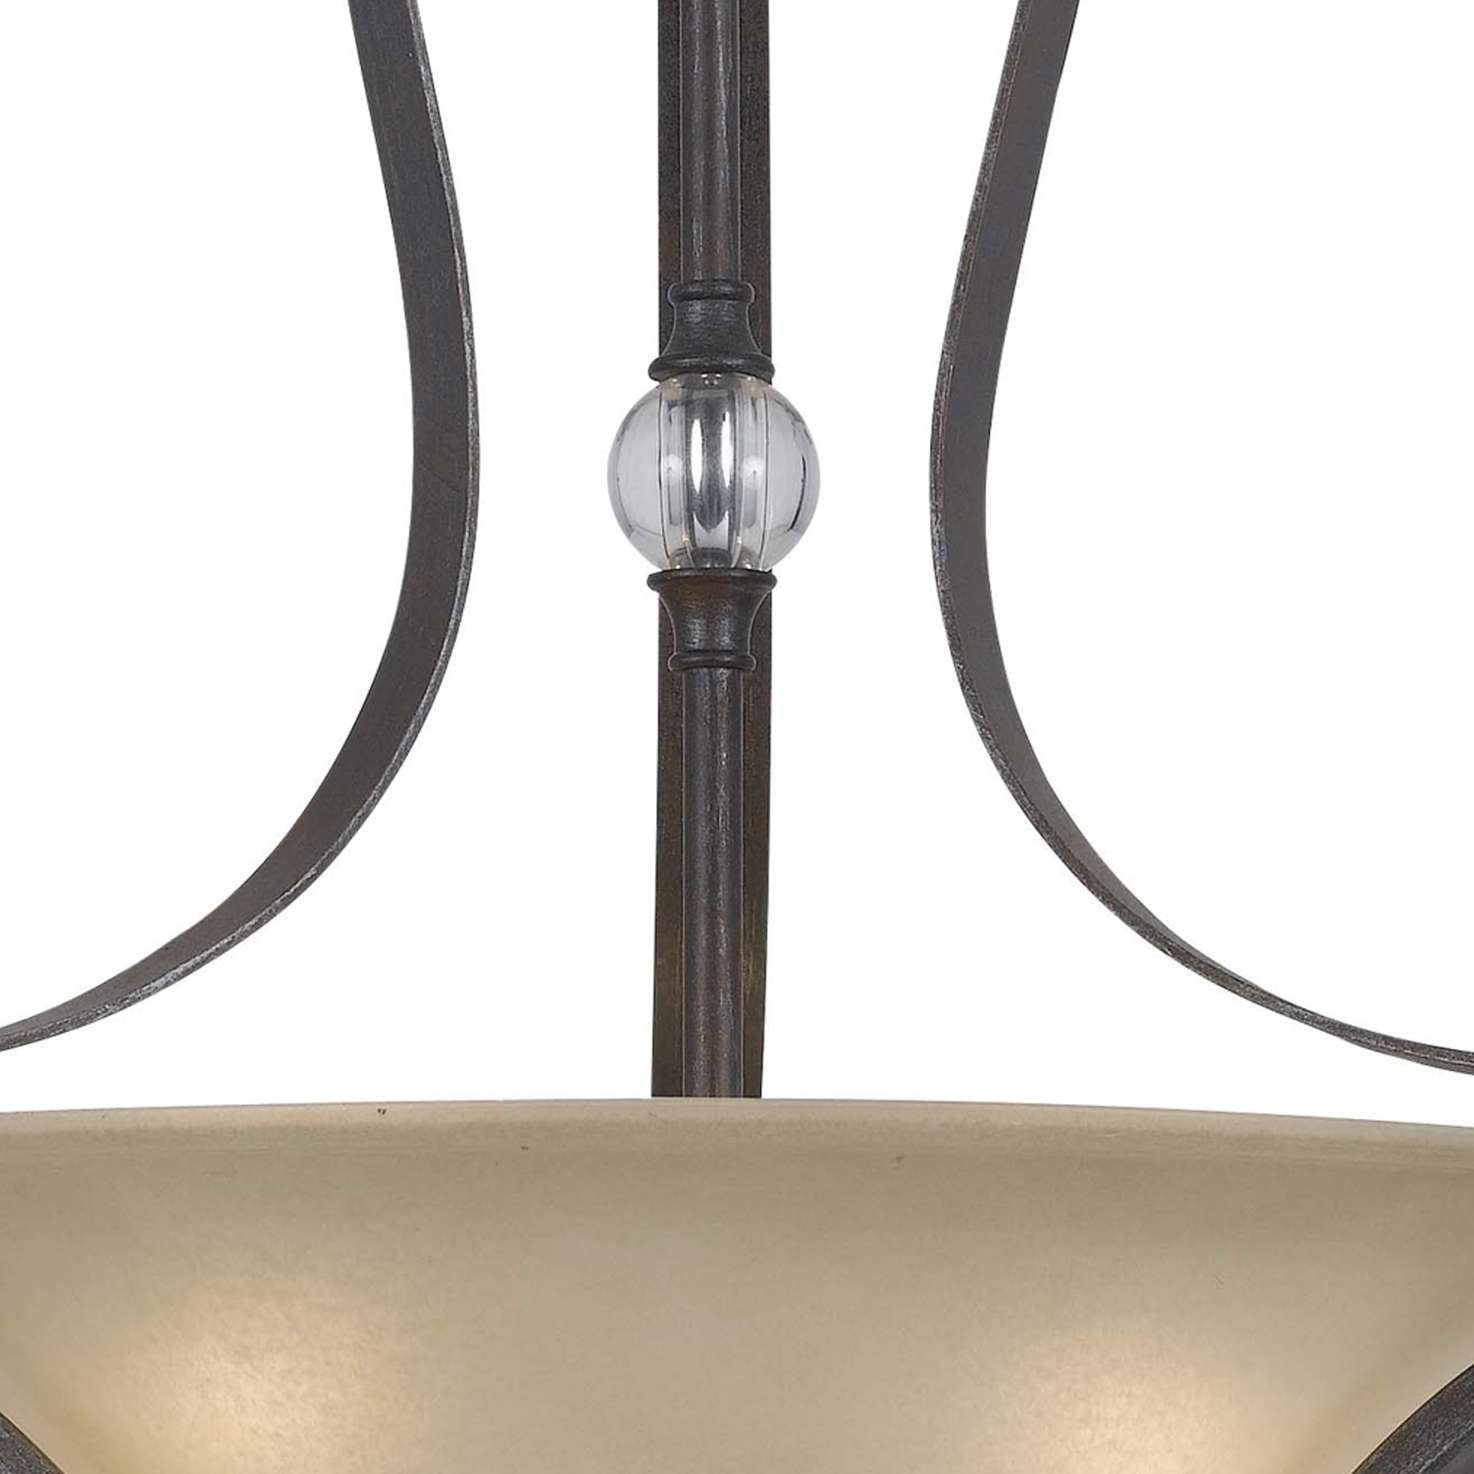 3 Bulb Bowl Style Glass Pendant Fixture With Metal Frame, Gray And Bronze By Benzara